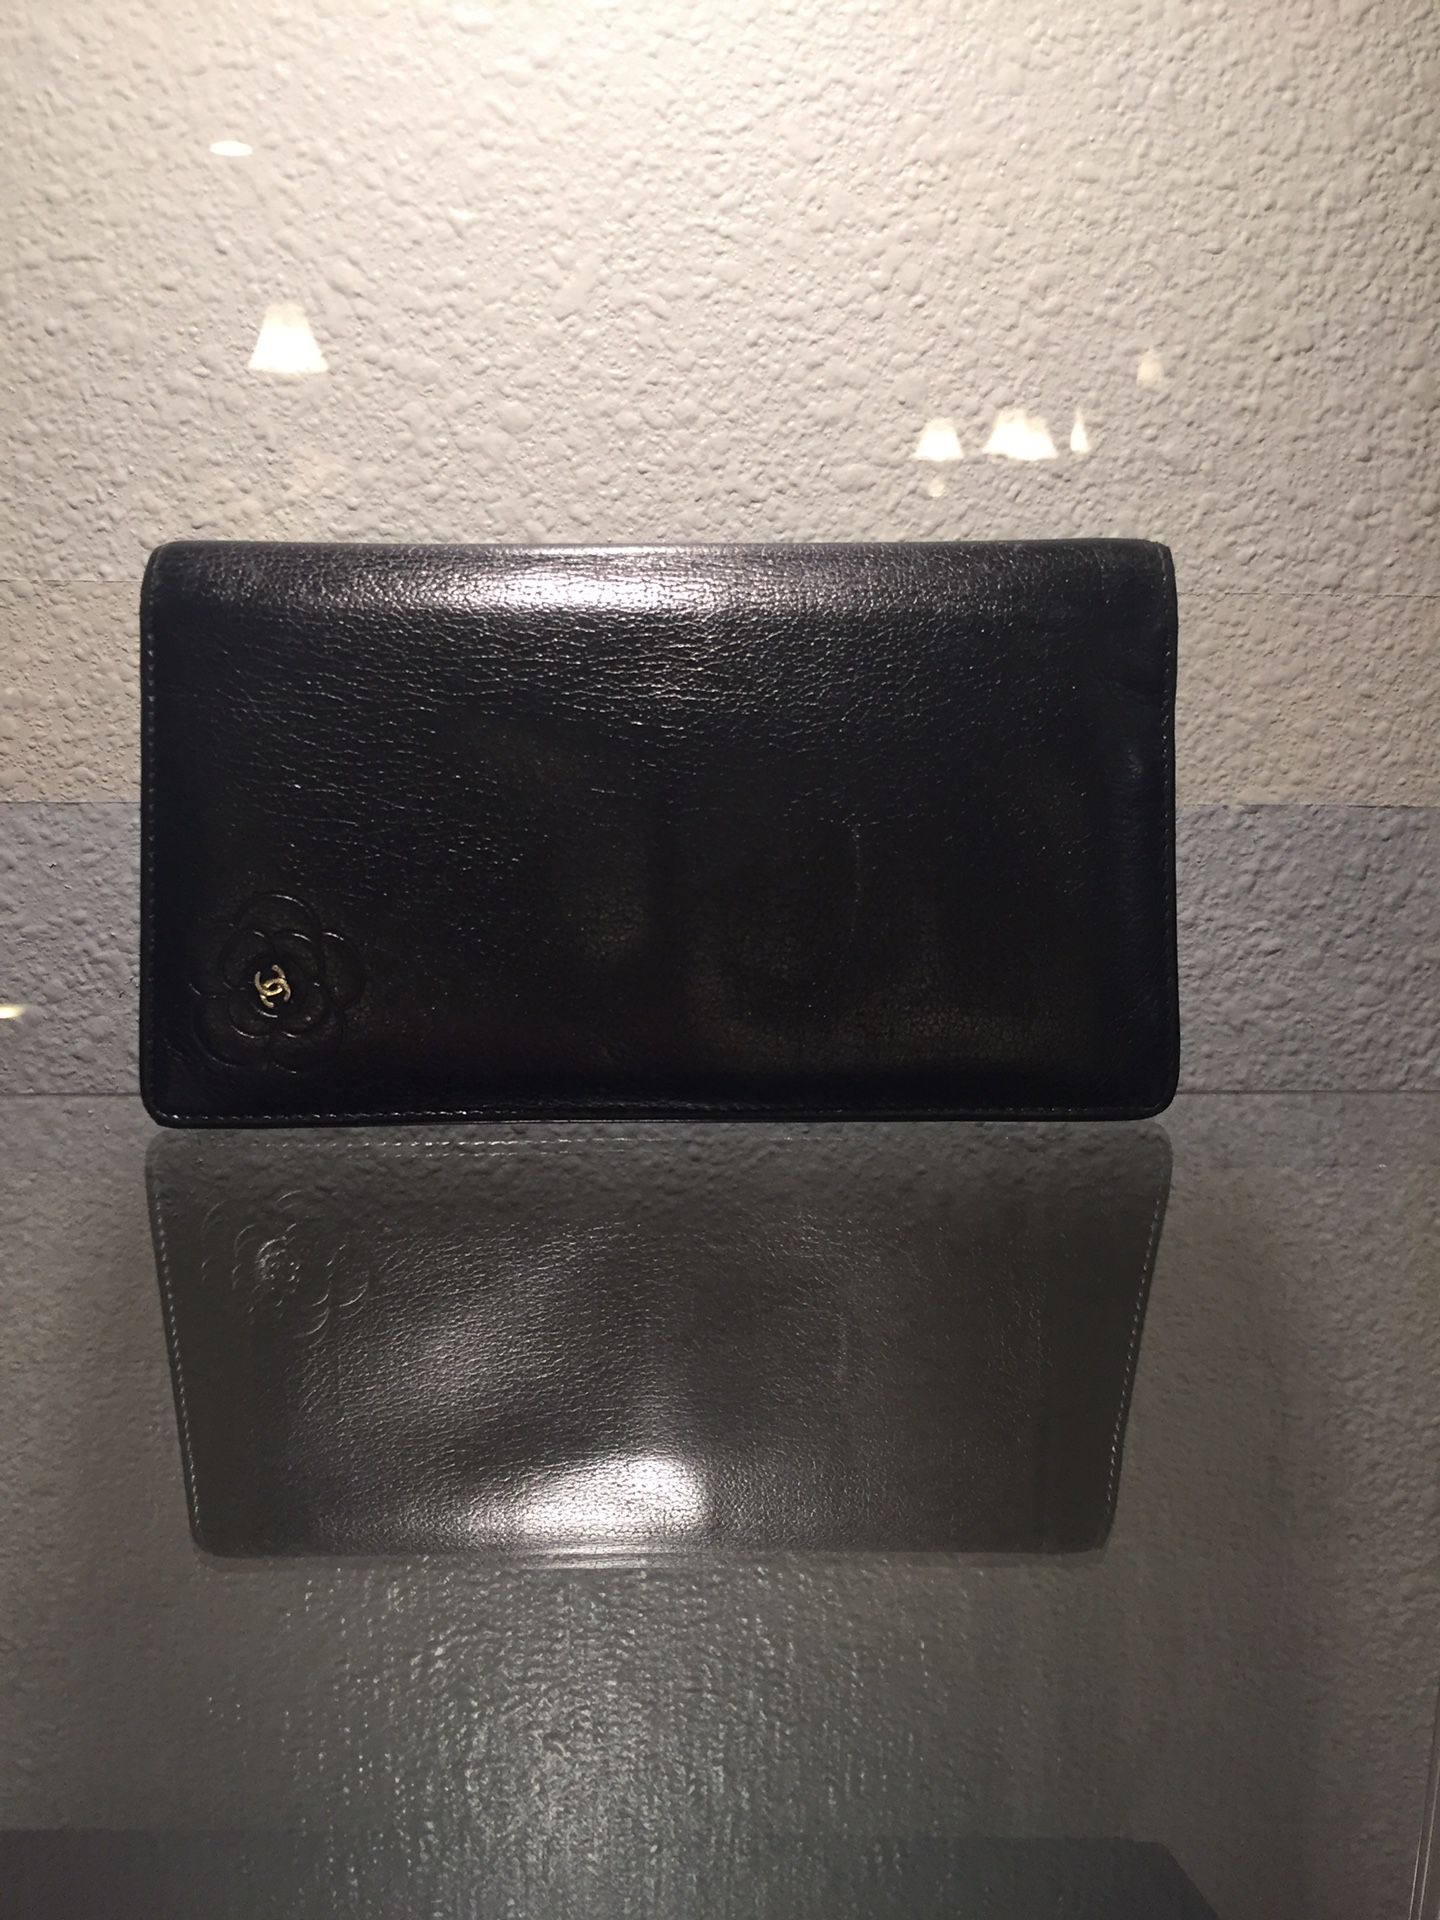 Authentic Chanel long wallet